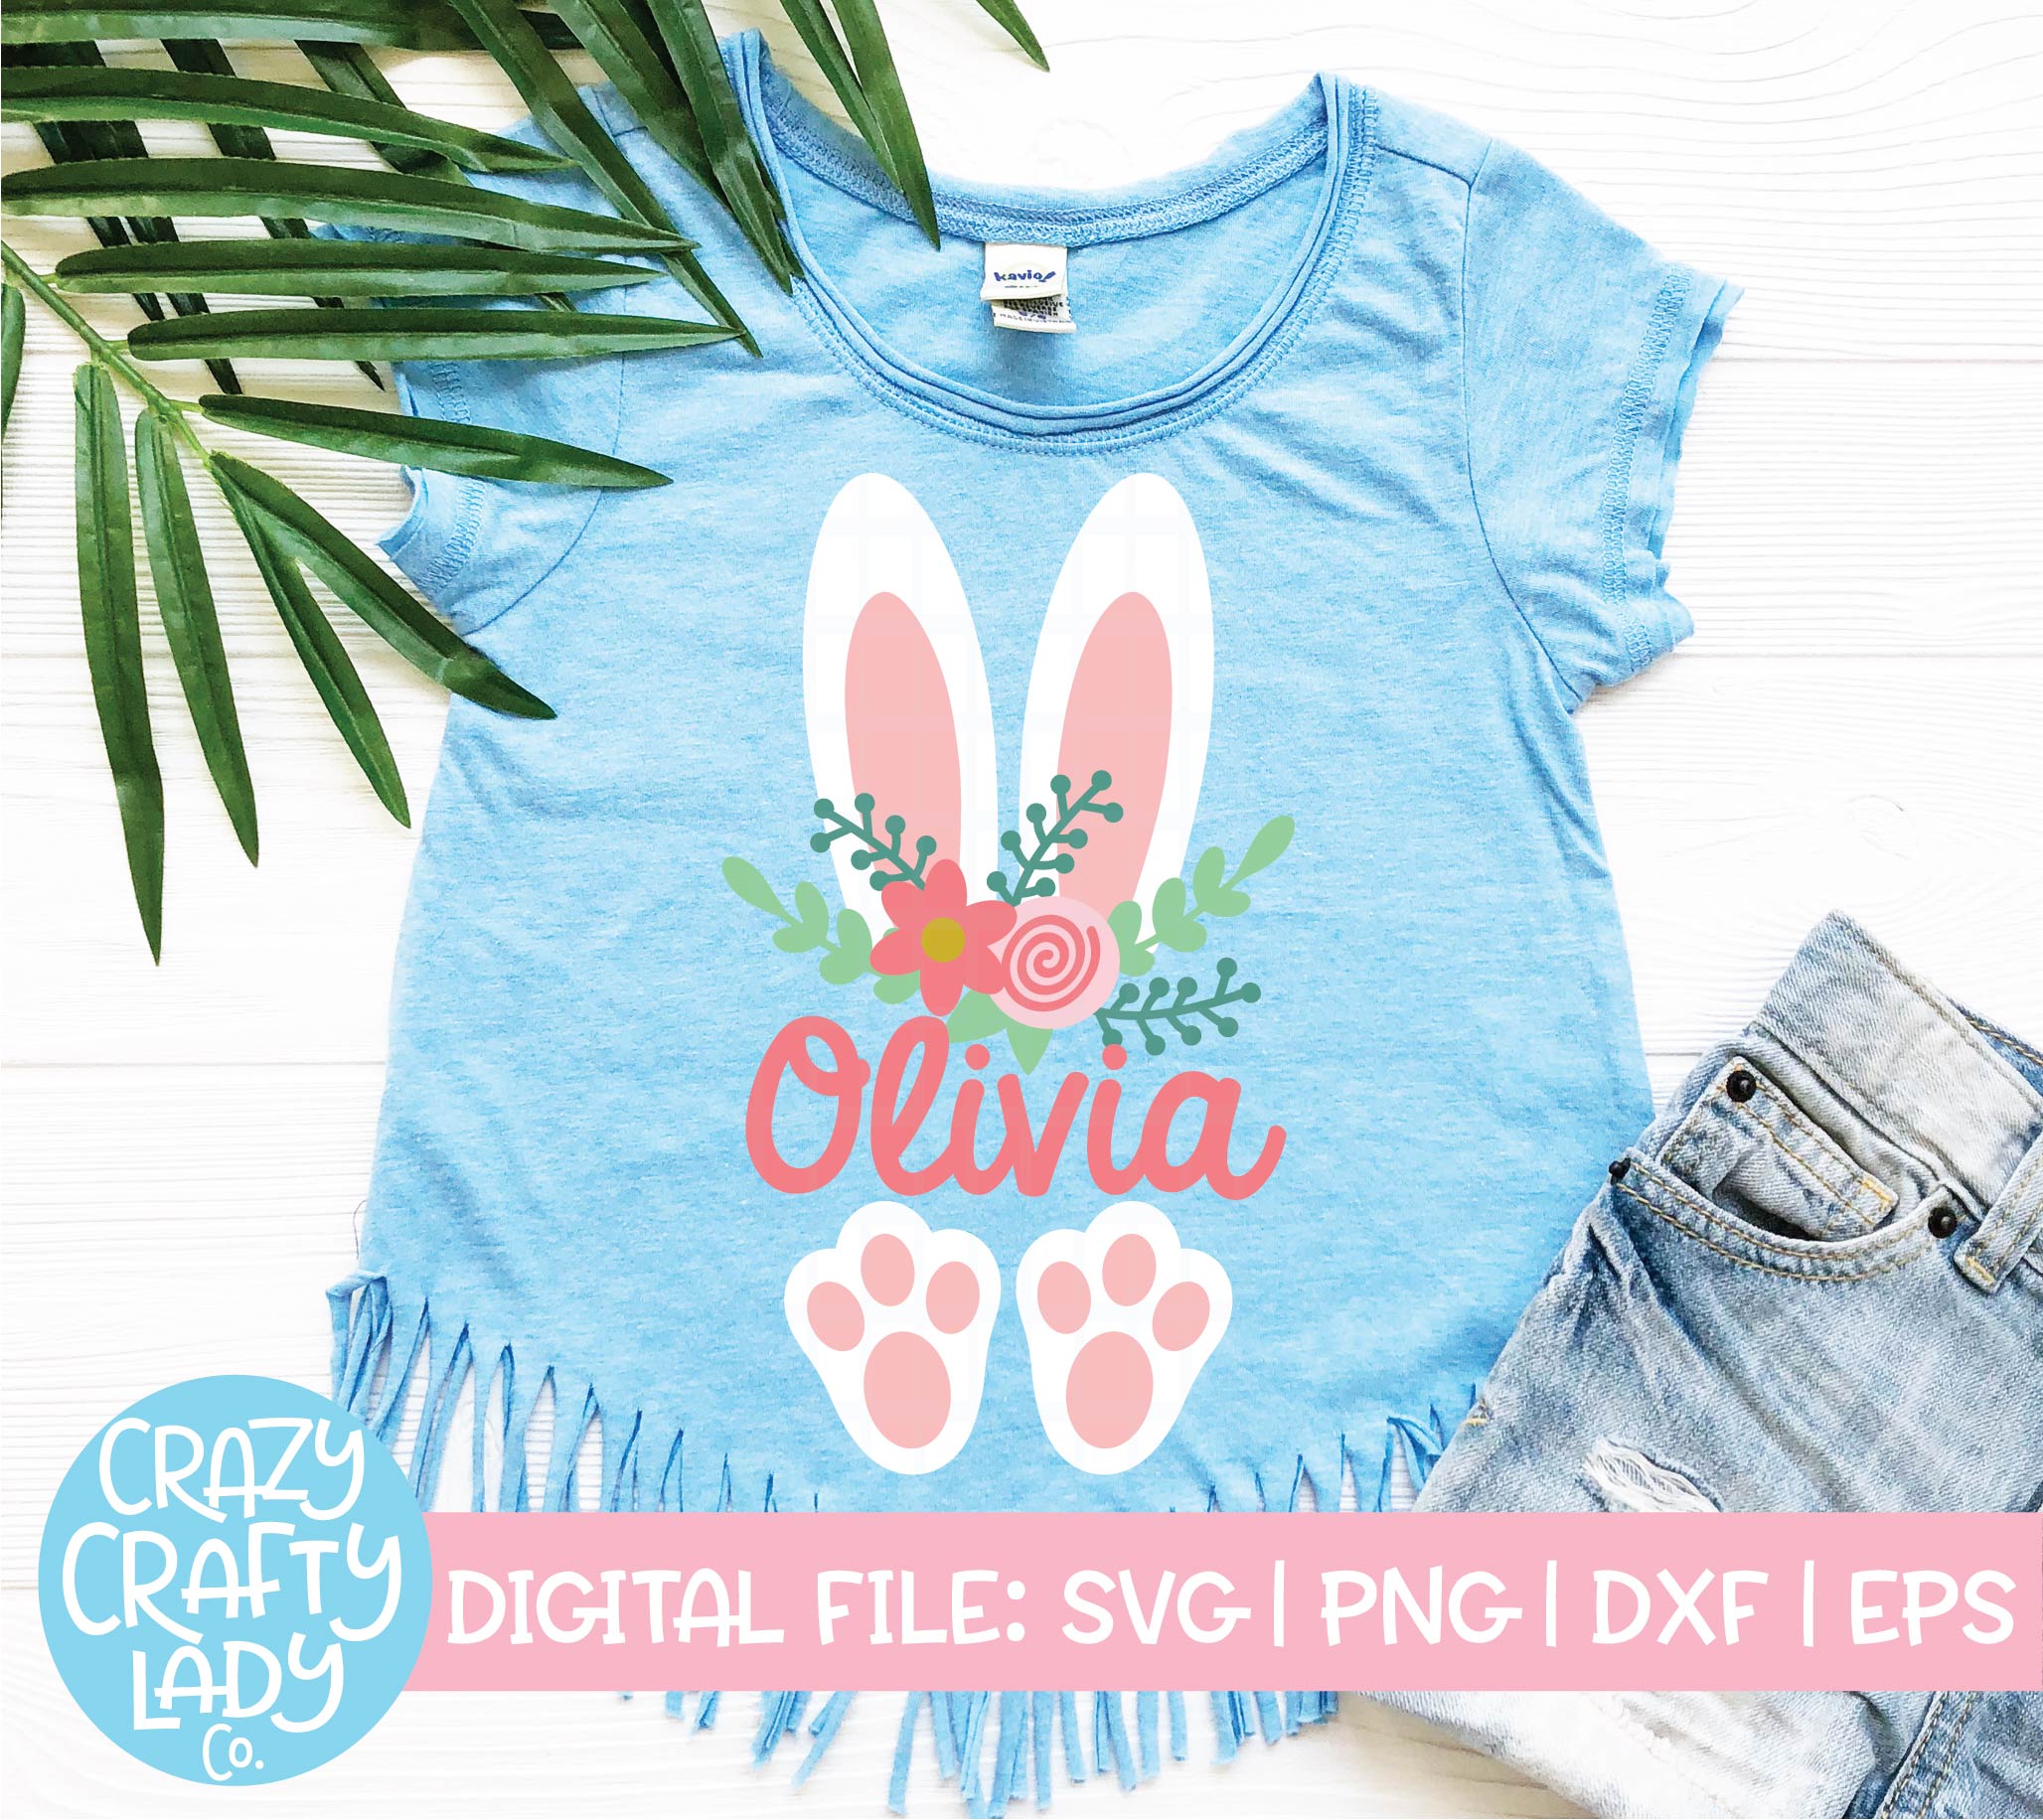 Download Floral Bunny Ears Feet Svg Cut File Crazy Crafty Lady Co